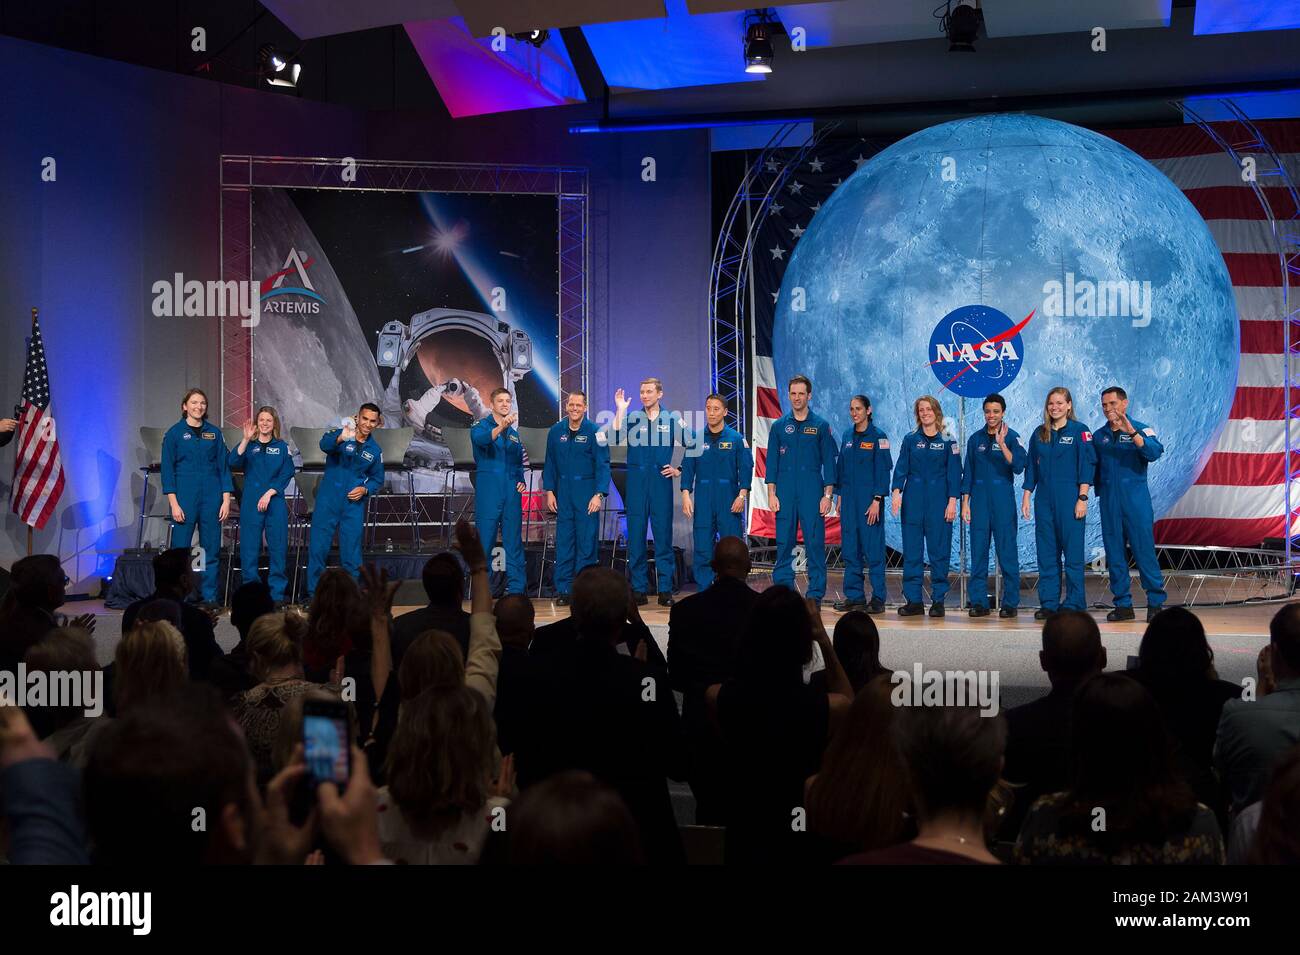 HOUSTON, TEXAS - 10 Jan 2020 - The 2017 Class of Astronauts participate in graduation ceremonies at the Johnson Space Center in Houston, Texas. In the Stock Photo